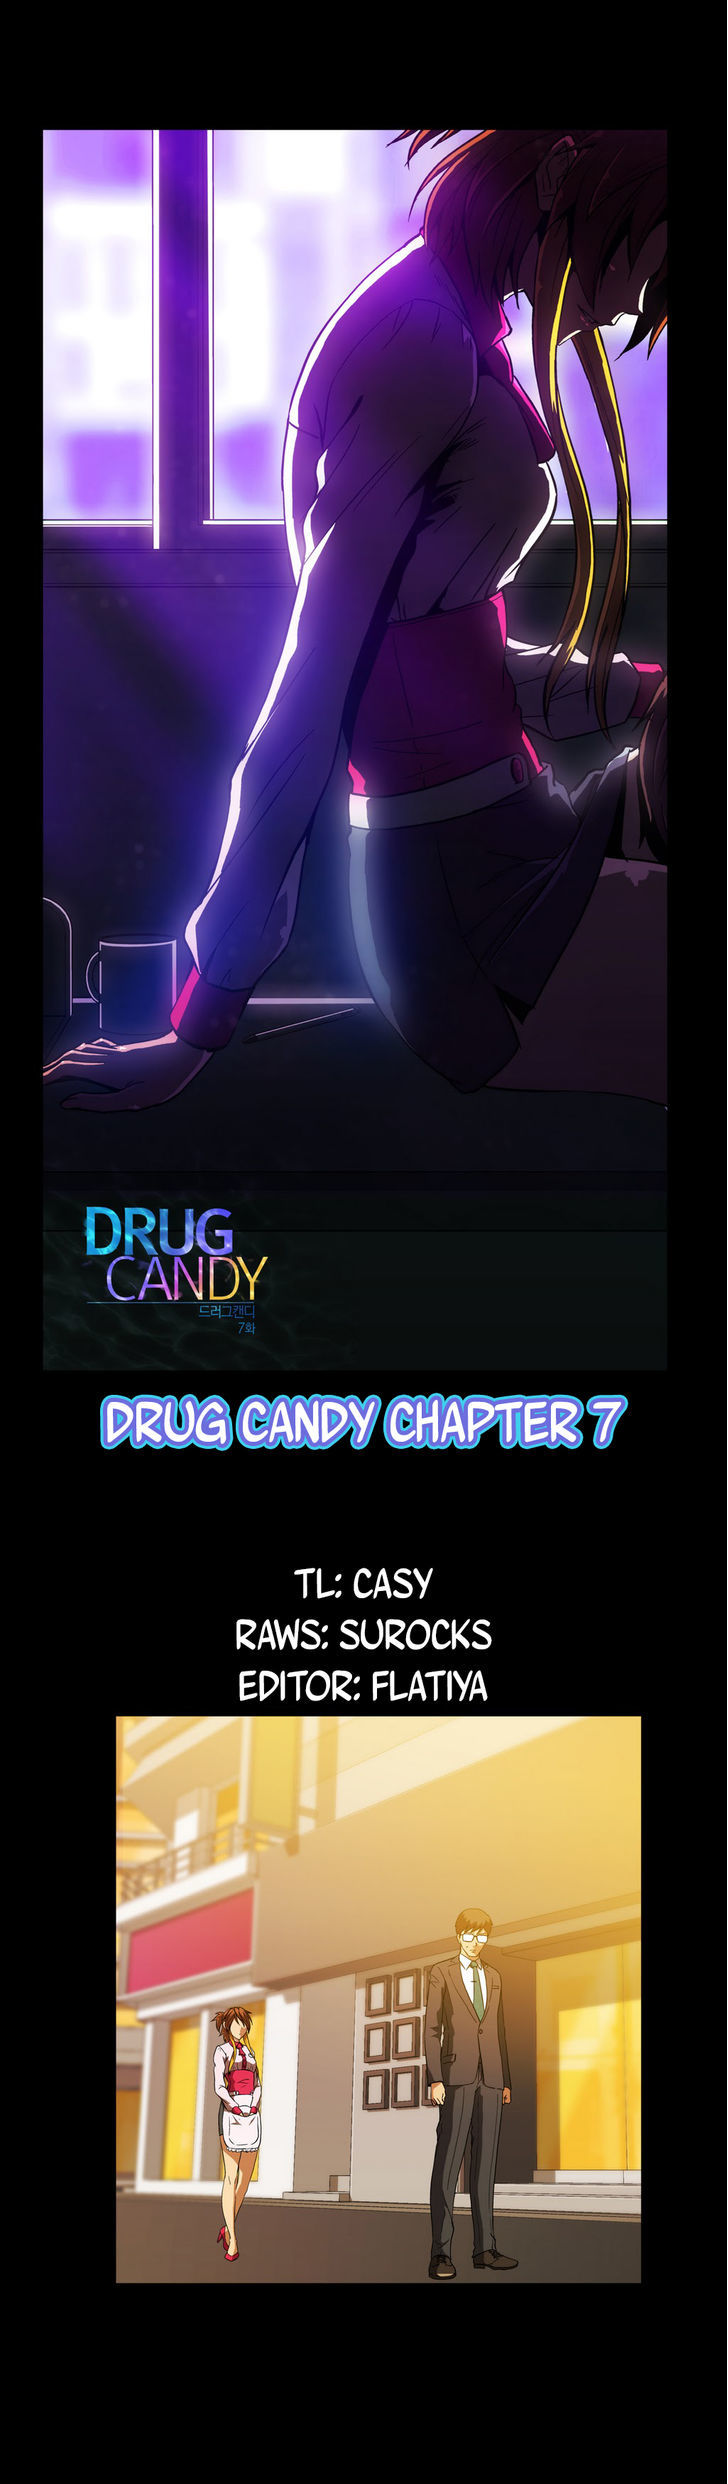 Drug Candy - Chapter 7 Page 1